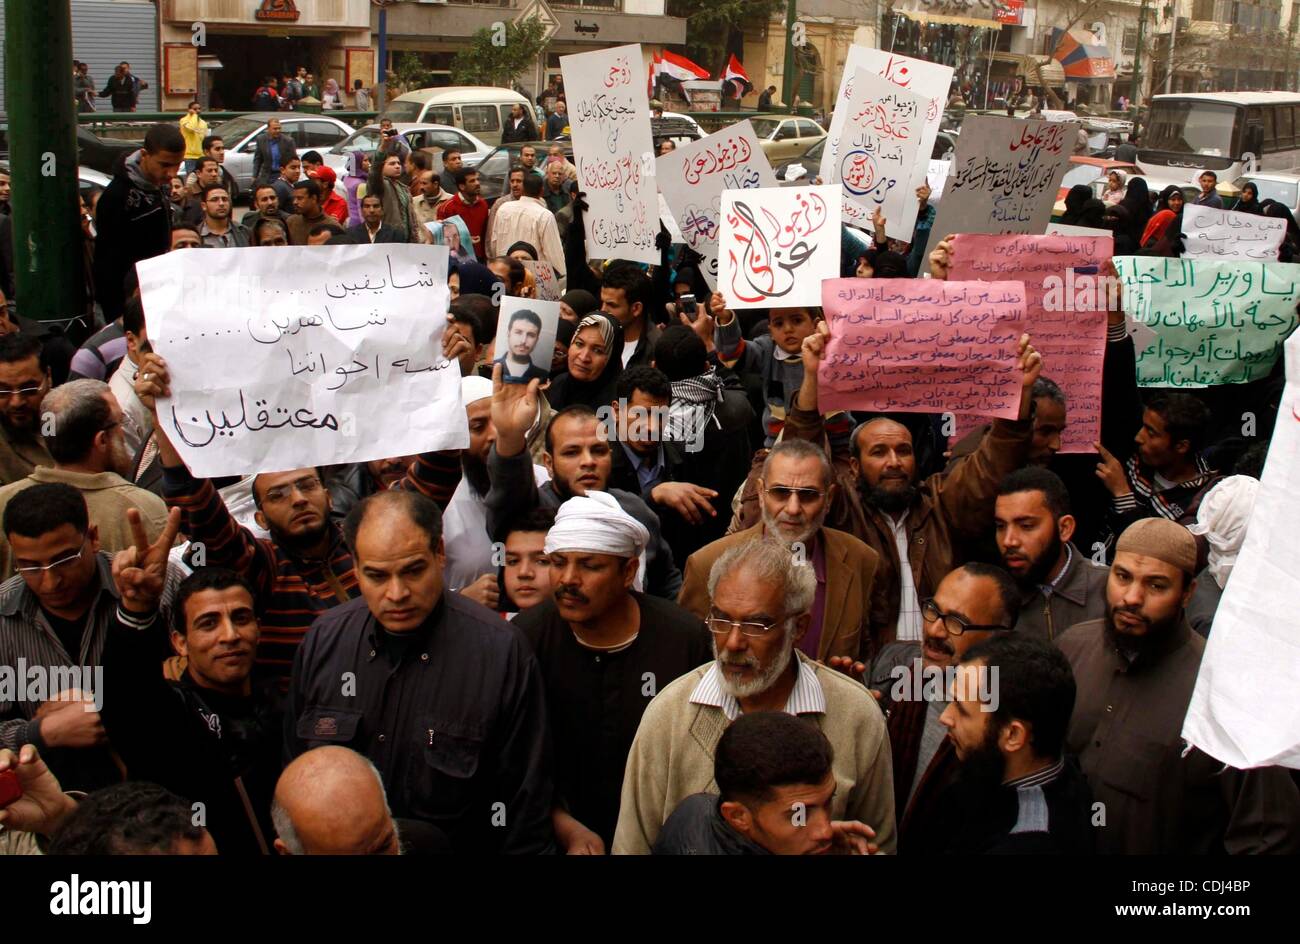 Feb 16, 2011 - Cairo, Egypt - Egyptians take part in a rally calling for release of political prisoners in Cairo, Egypt. (Credit Image: &#169; Ahmed Asad/apaimages/ZUMAPRESS.com) Stock Photo